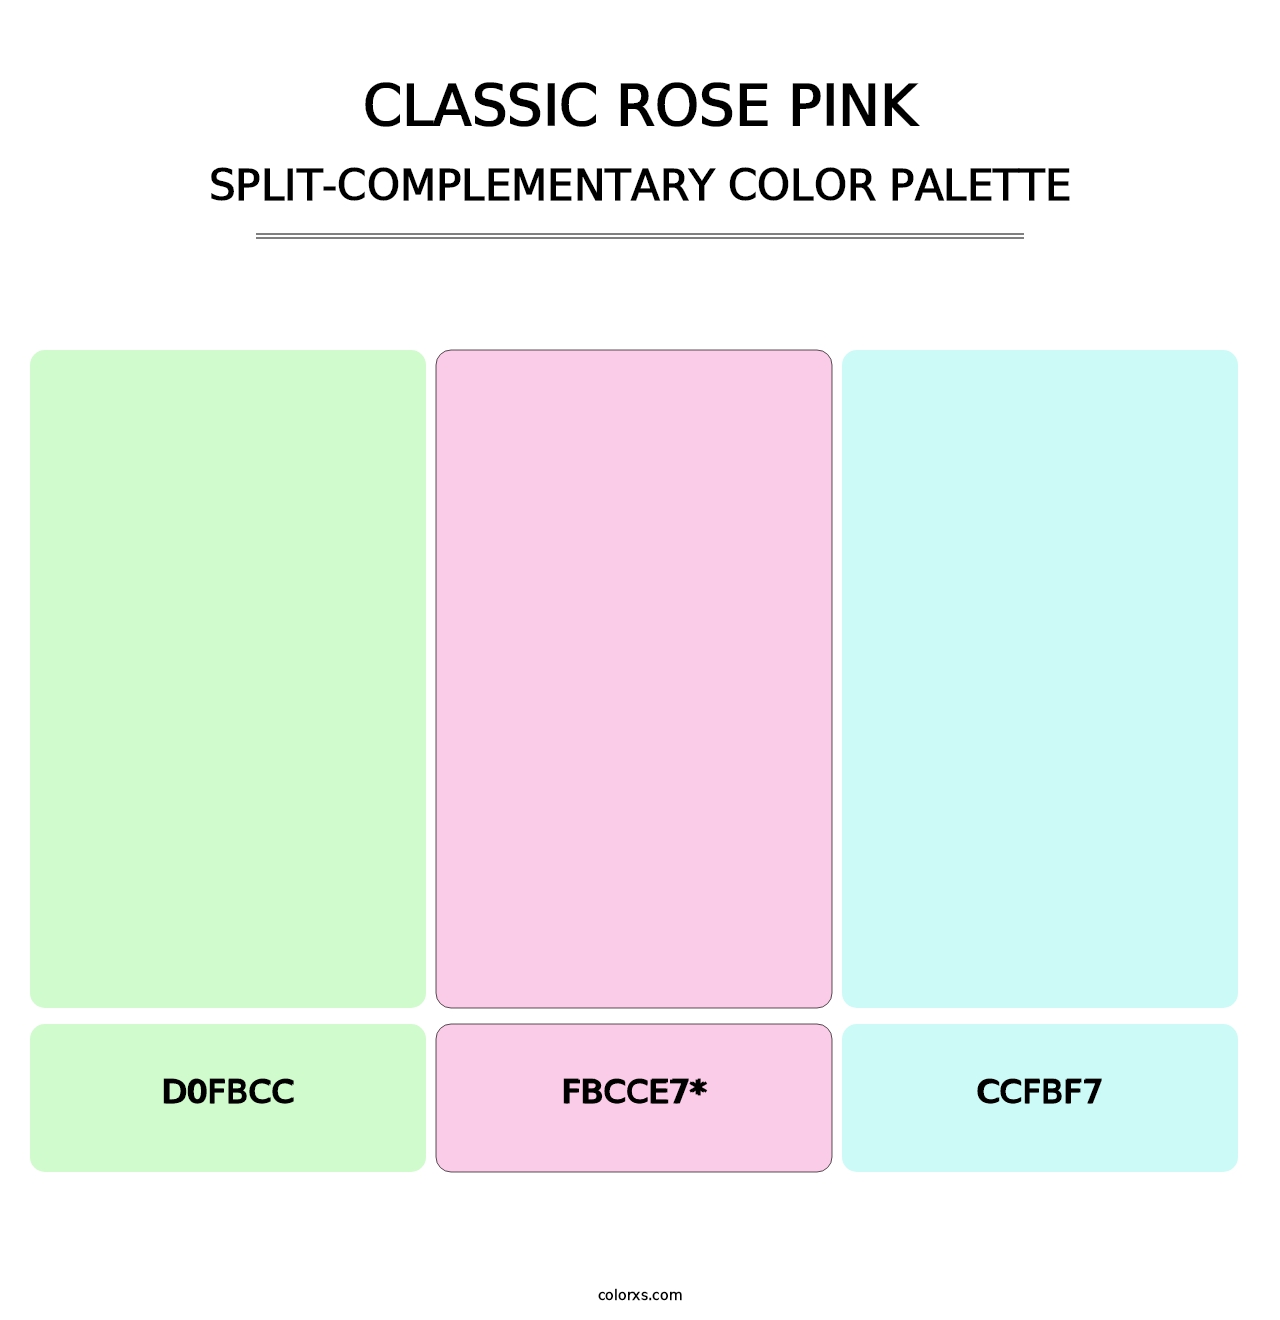 Classic Rose Pink - Split-Complementary Color Palette